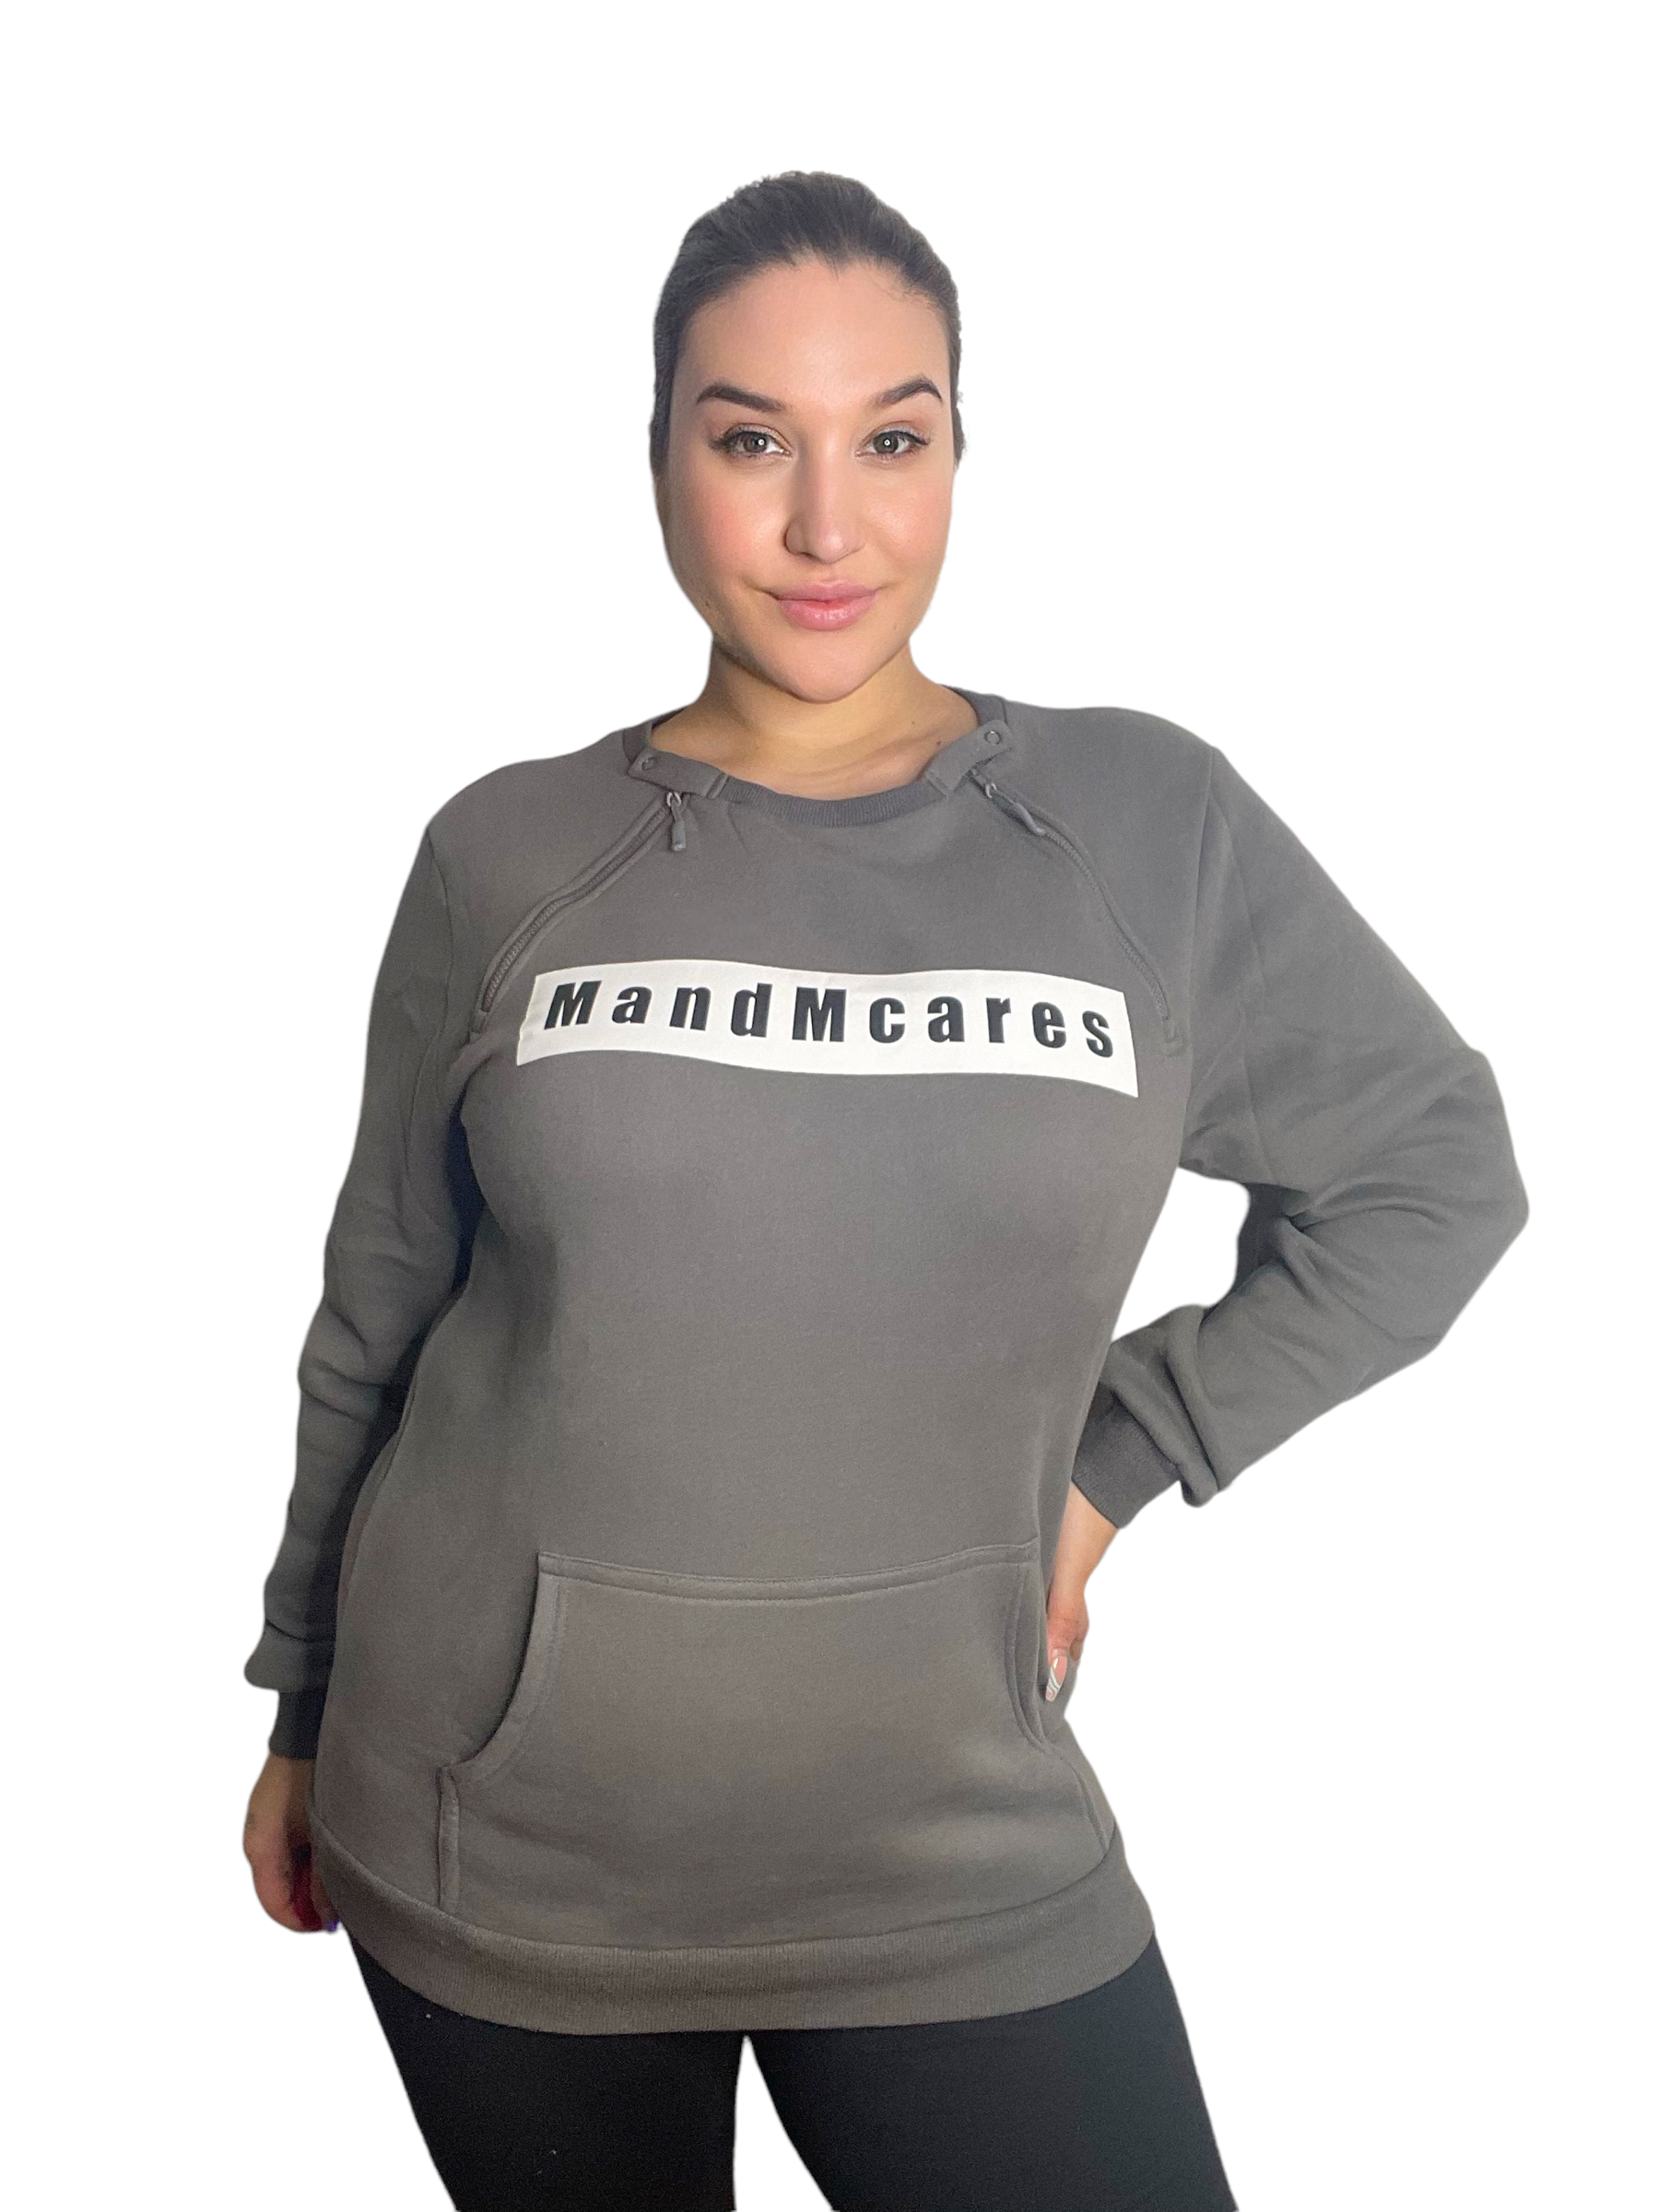 Plus Size Sweater Chest Port  Access for Men and Women